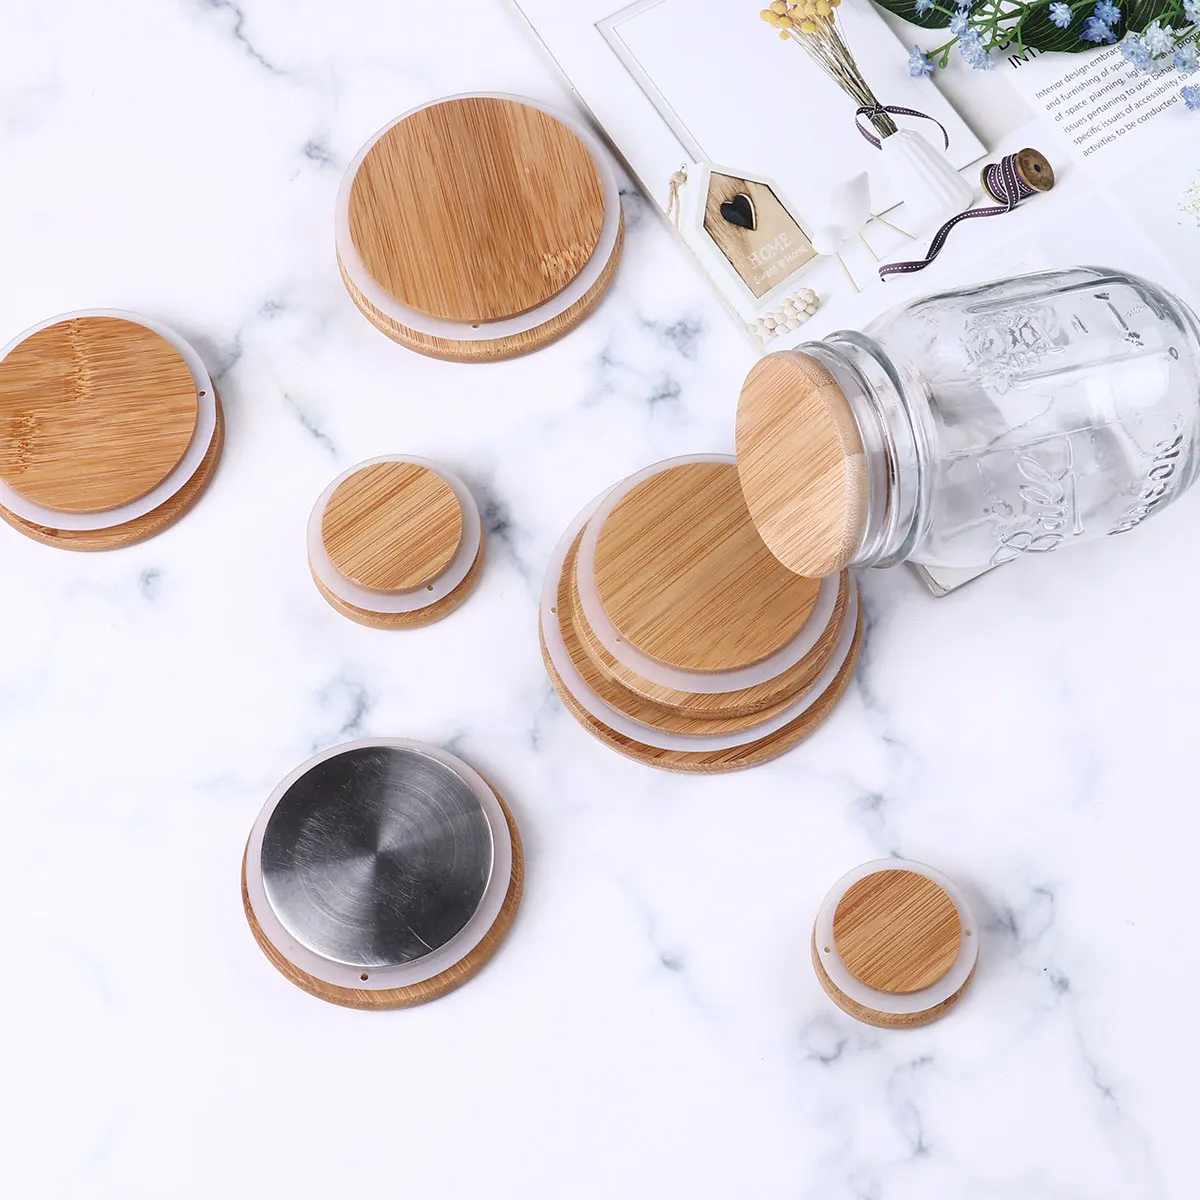 Bamboo Mason Jar Storage Canning Lids Drinking Cup Covers Reusable Seal Ring Pine Wooden Lid Caps for Glass Jars Ceramic Mugs images - 6